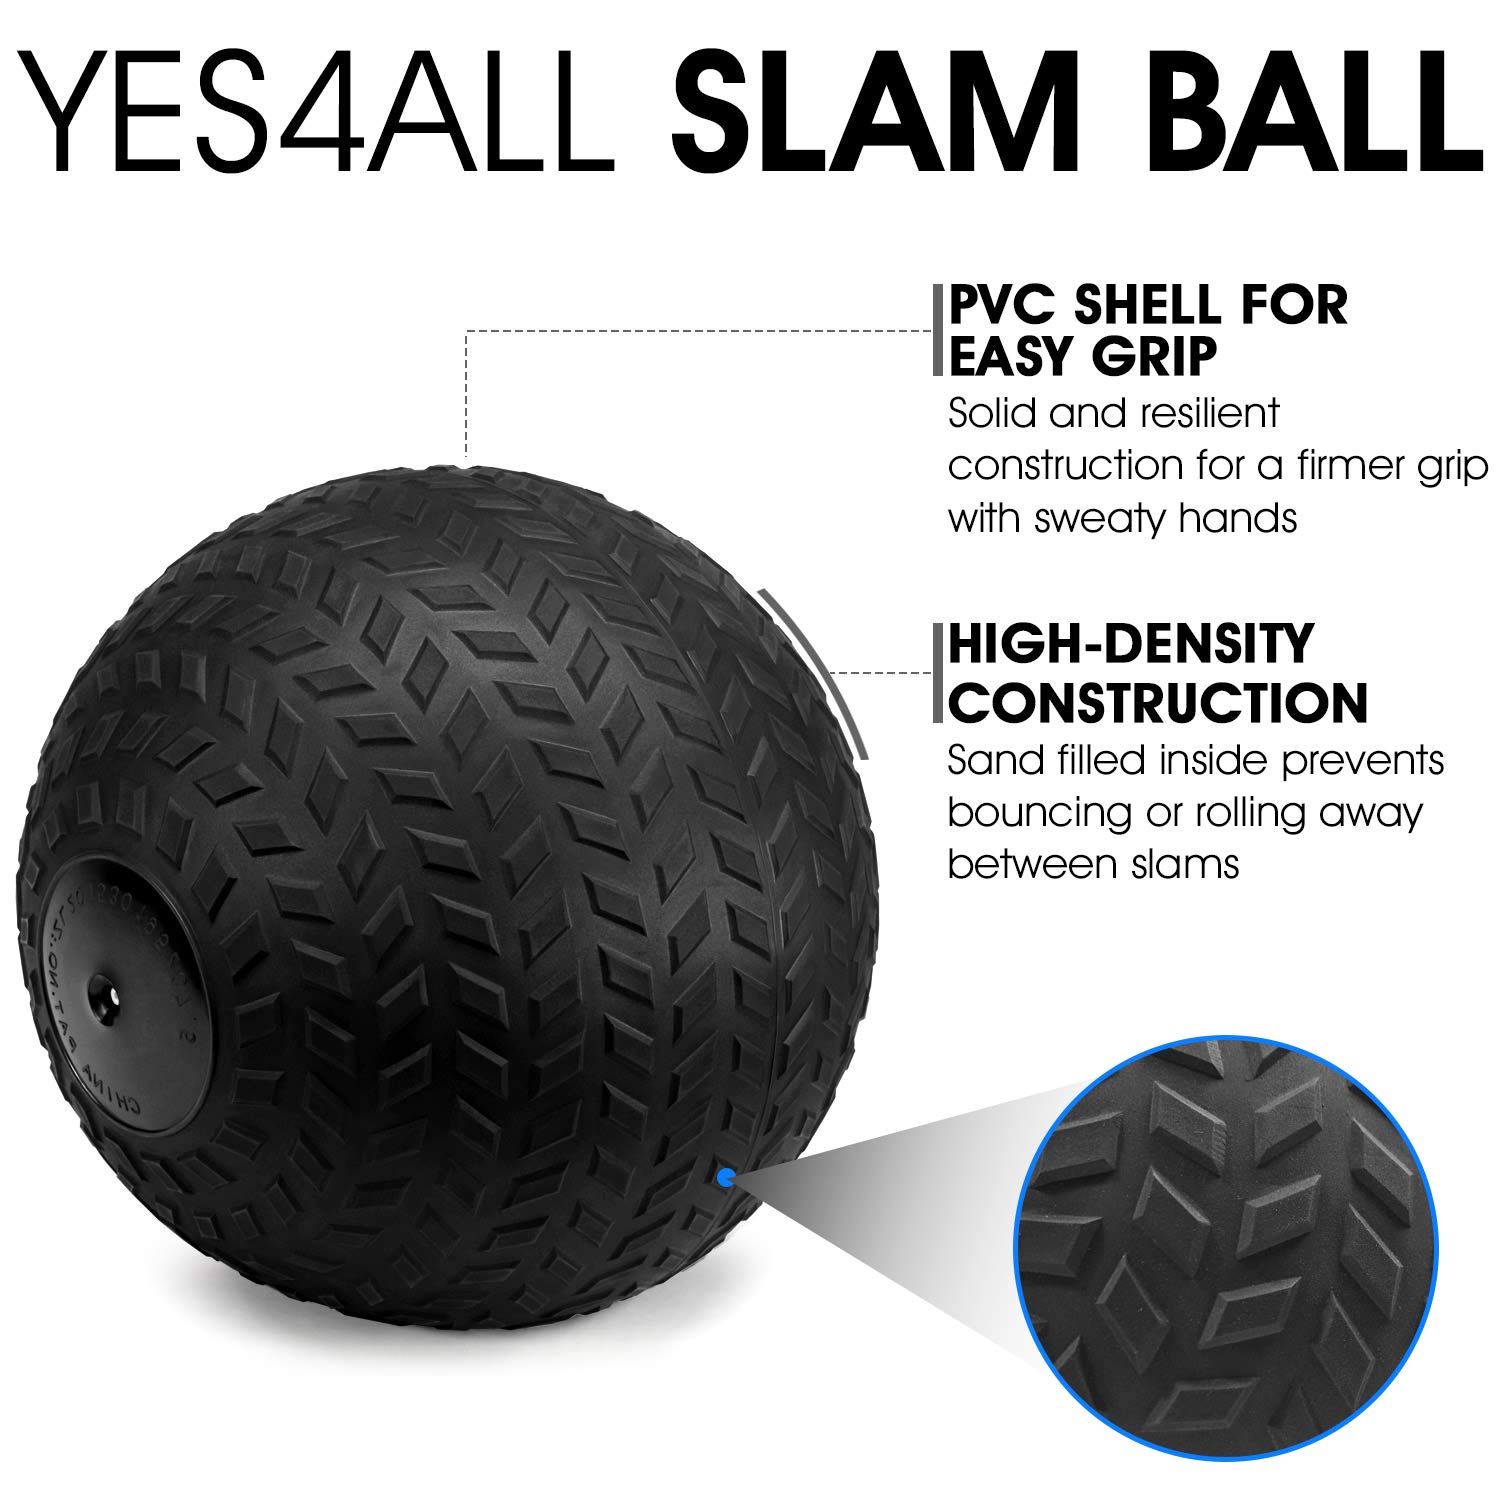 Yes4All Slam Balls, Weighted Balls for Exercise, Sand Filled Workout Ball with Different Textures & Weights, High-Density Rubber for Exercises, Athletic Training, 10-40lbs